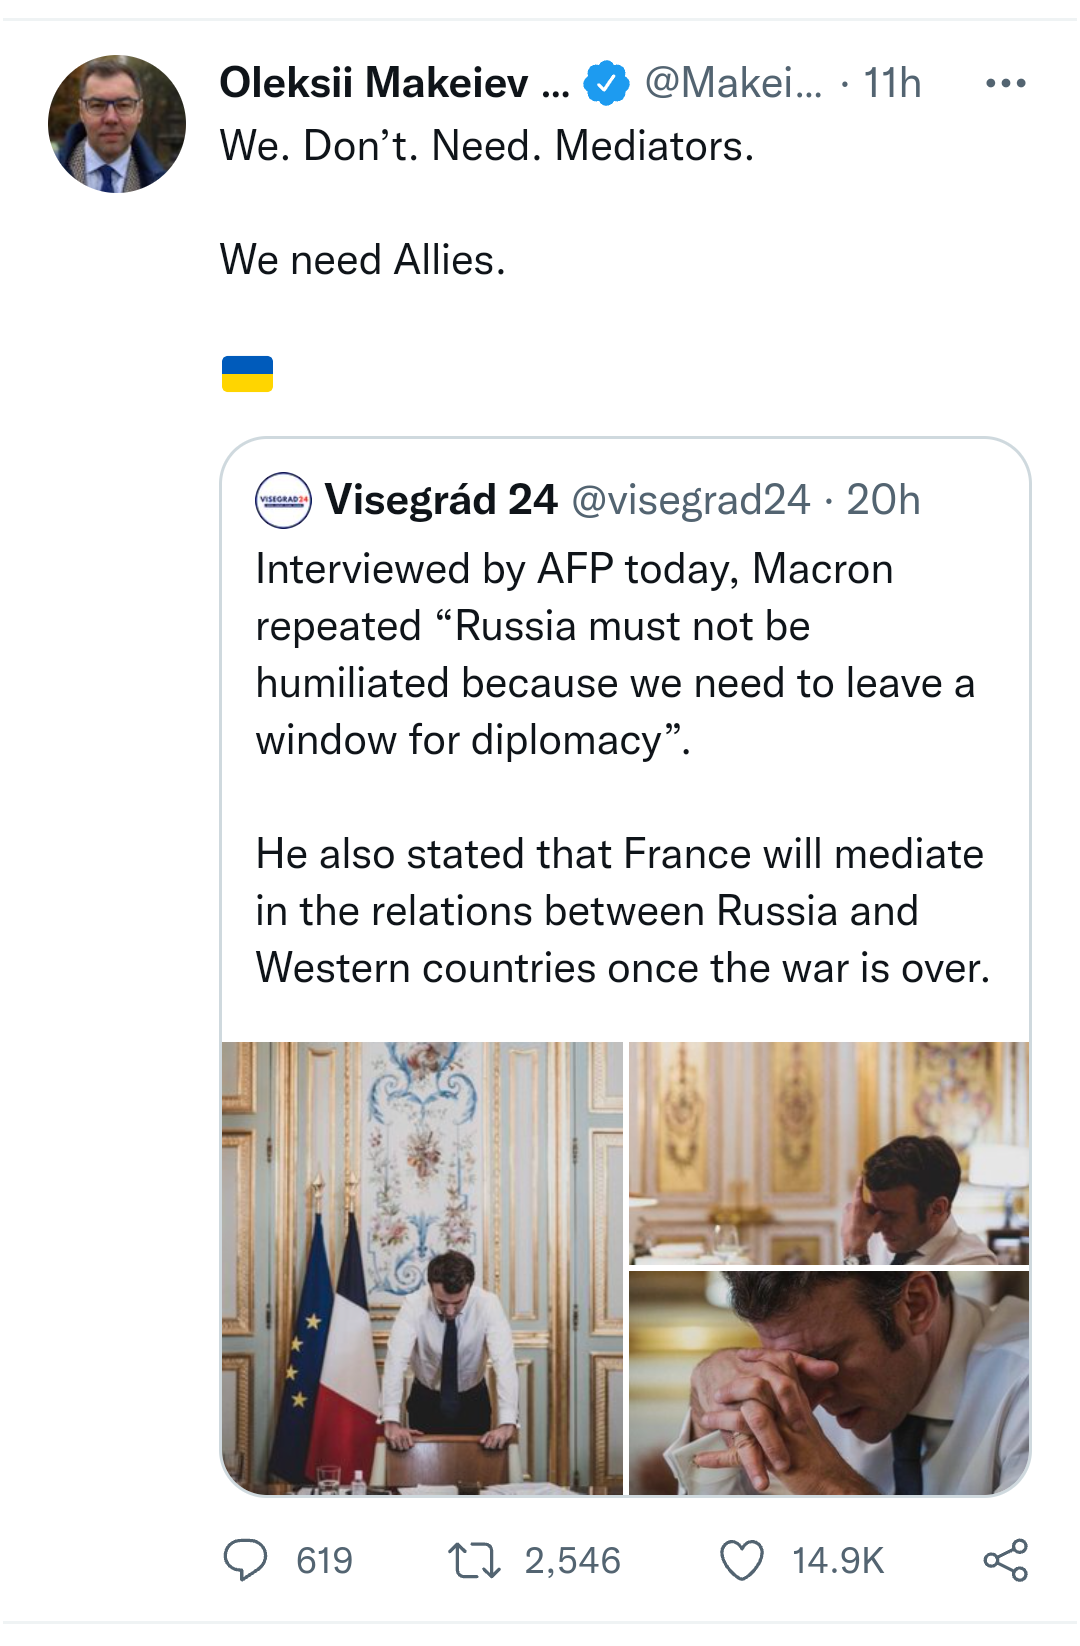 "Calls to avoid humiliation of Russia can only humiliate France" - Ukraine slams French president Macron for saying Russia should not be humiliated